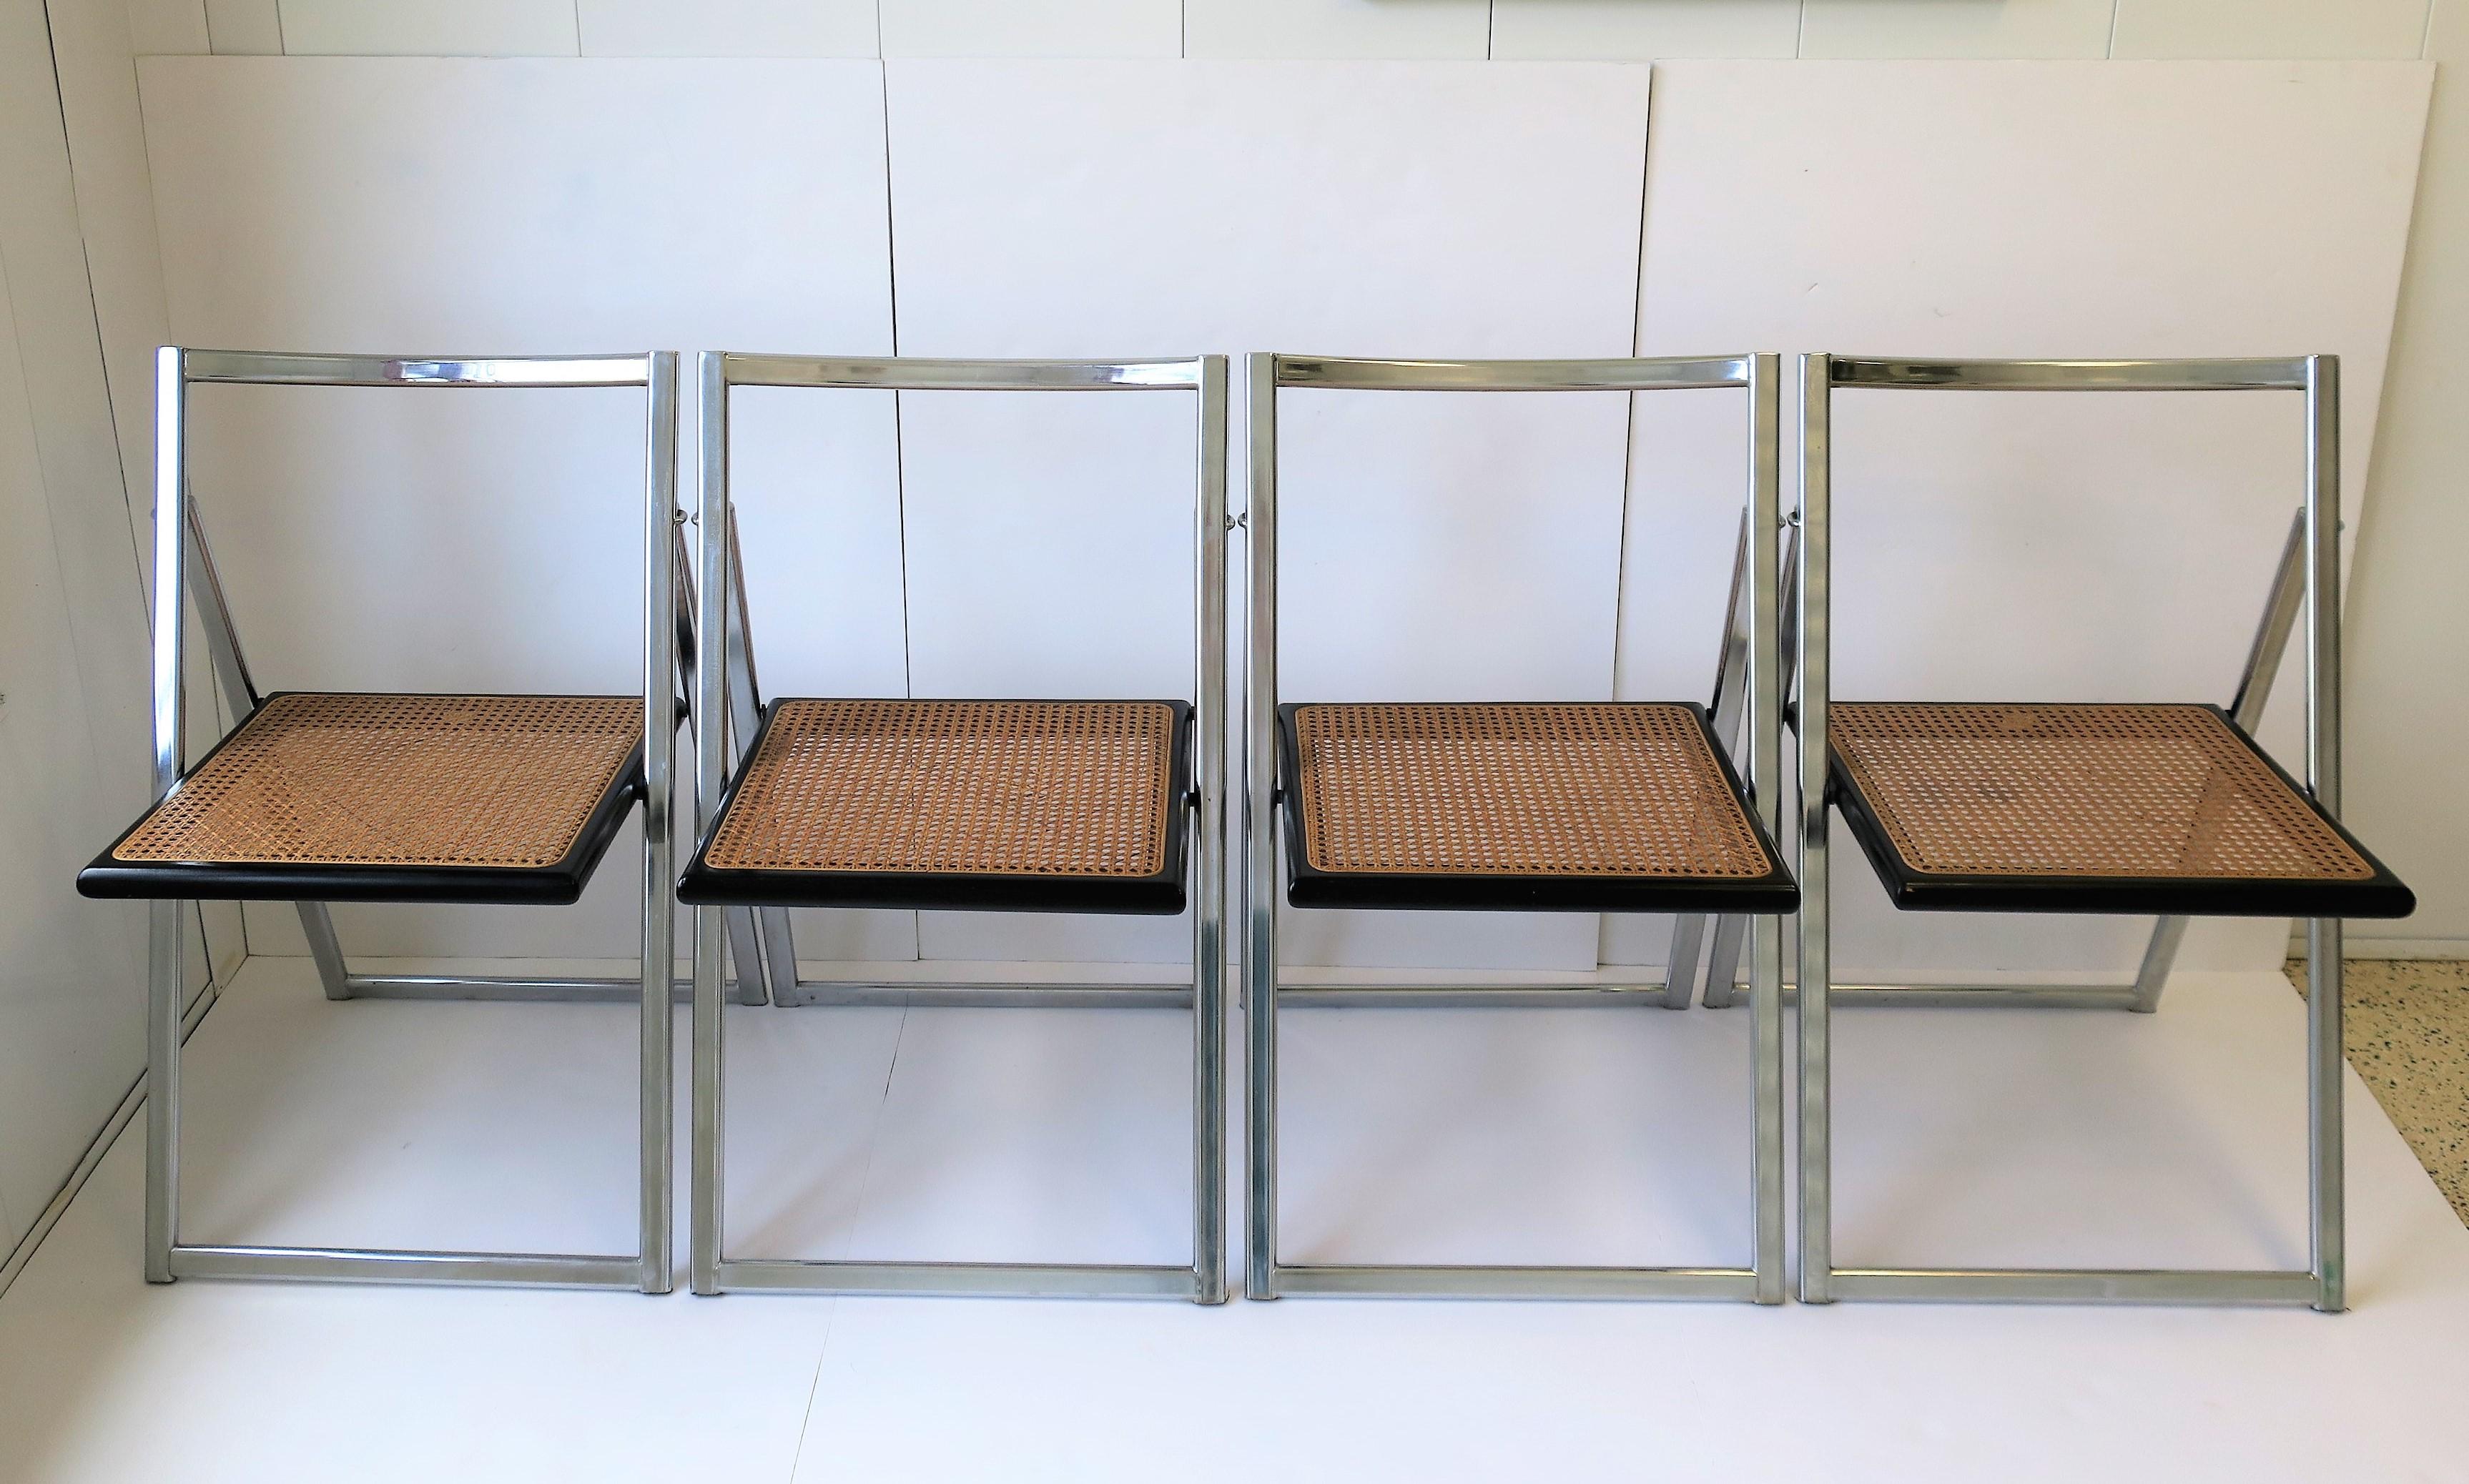 A beautiful set of four (4) Italian Midcentury Modern to Postmodern period chrome, black wood and cane seat folding chairs, attributed to Italian design house Arrben, circa late-1960s - 1970s, Italy. Marked 